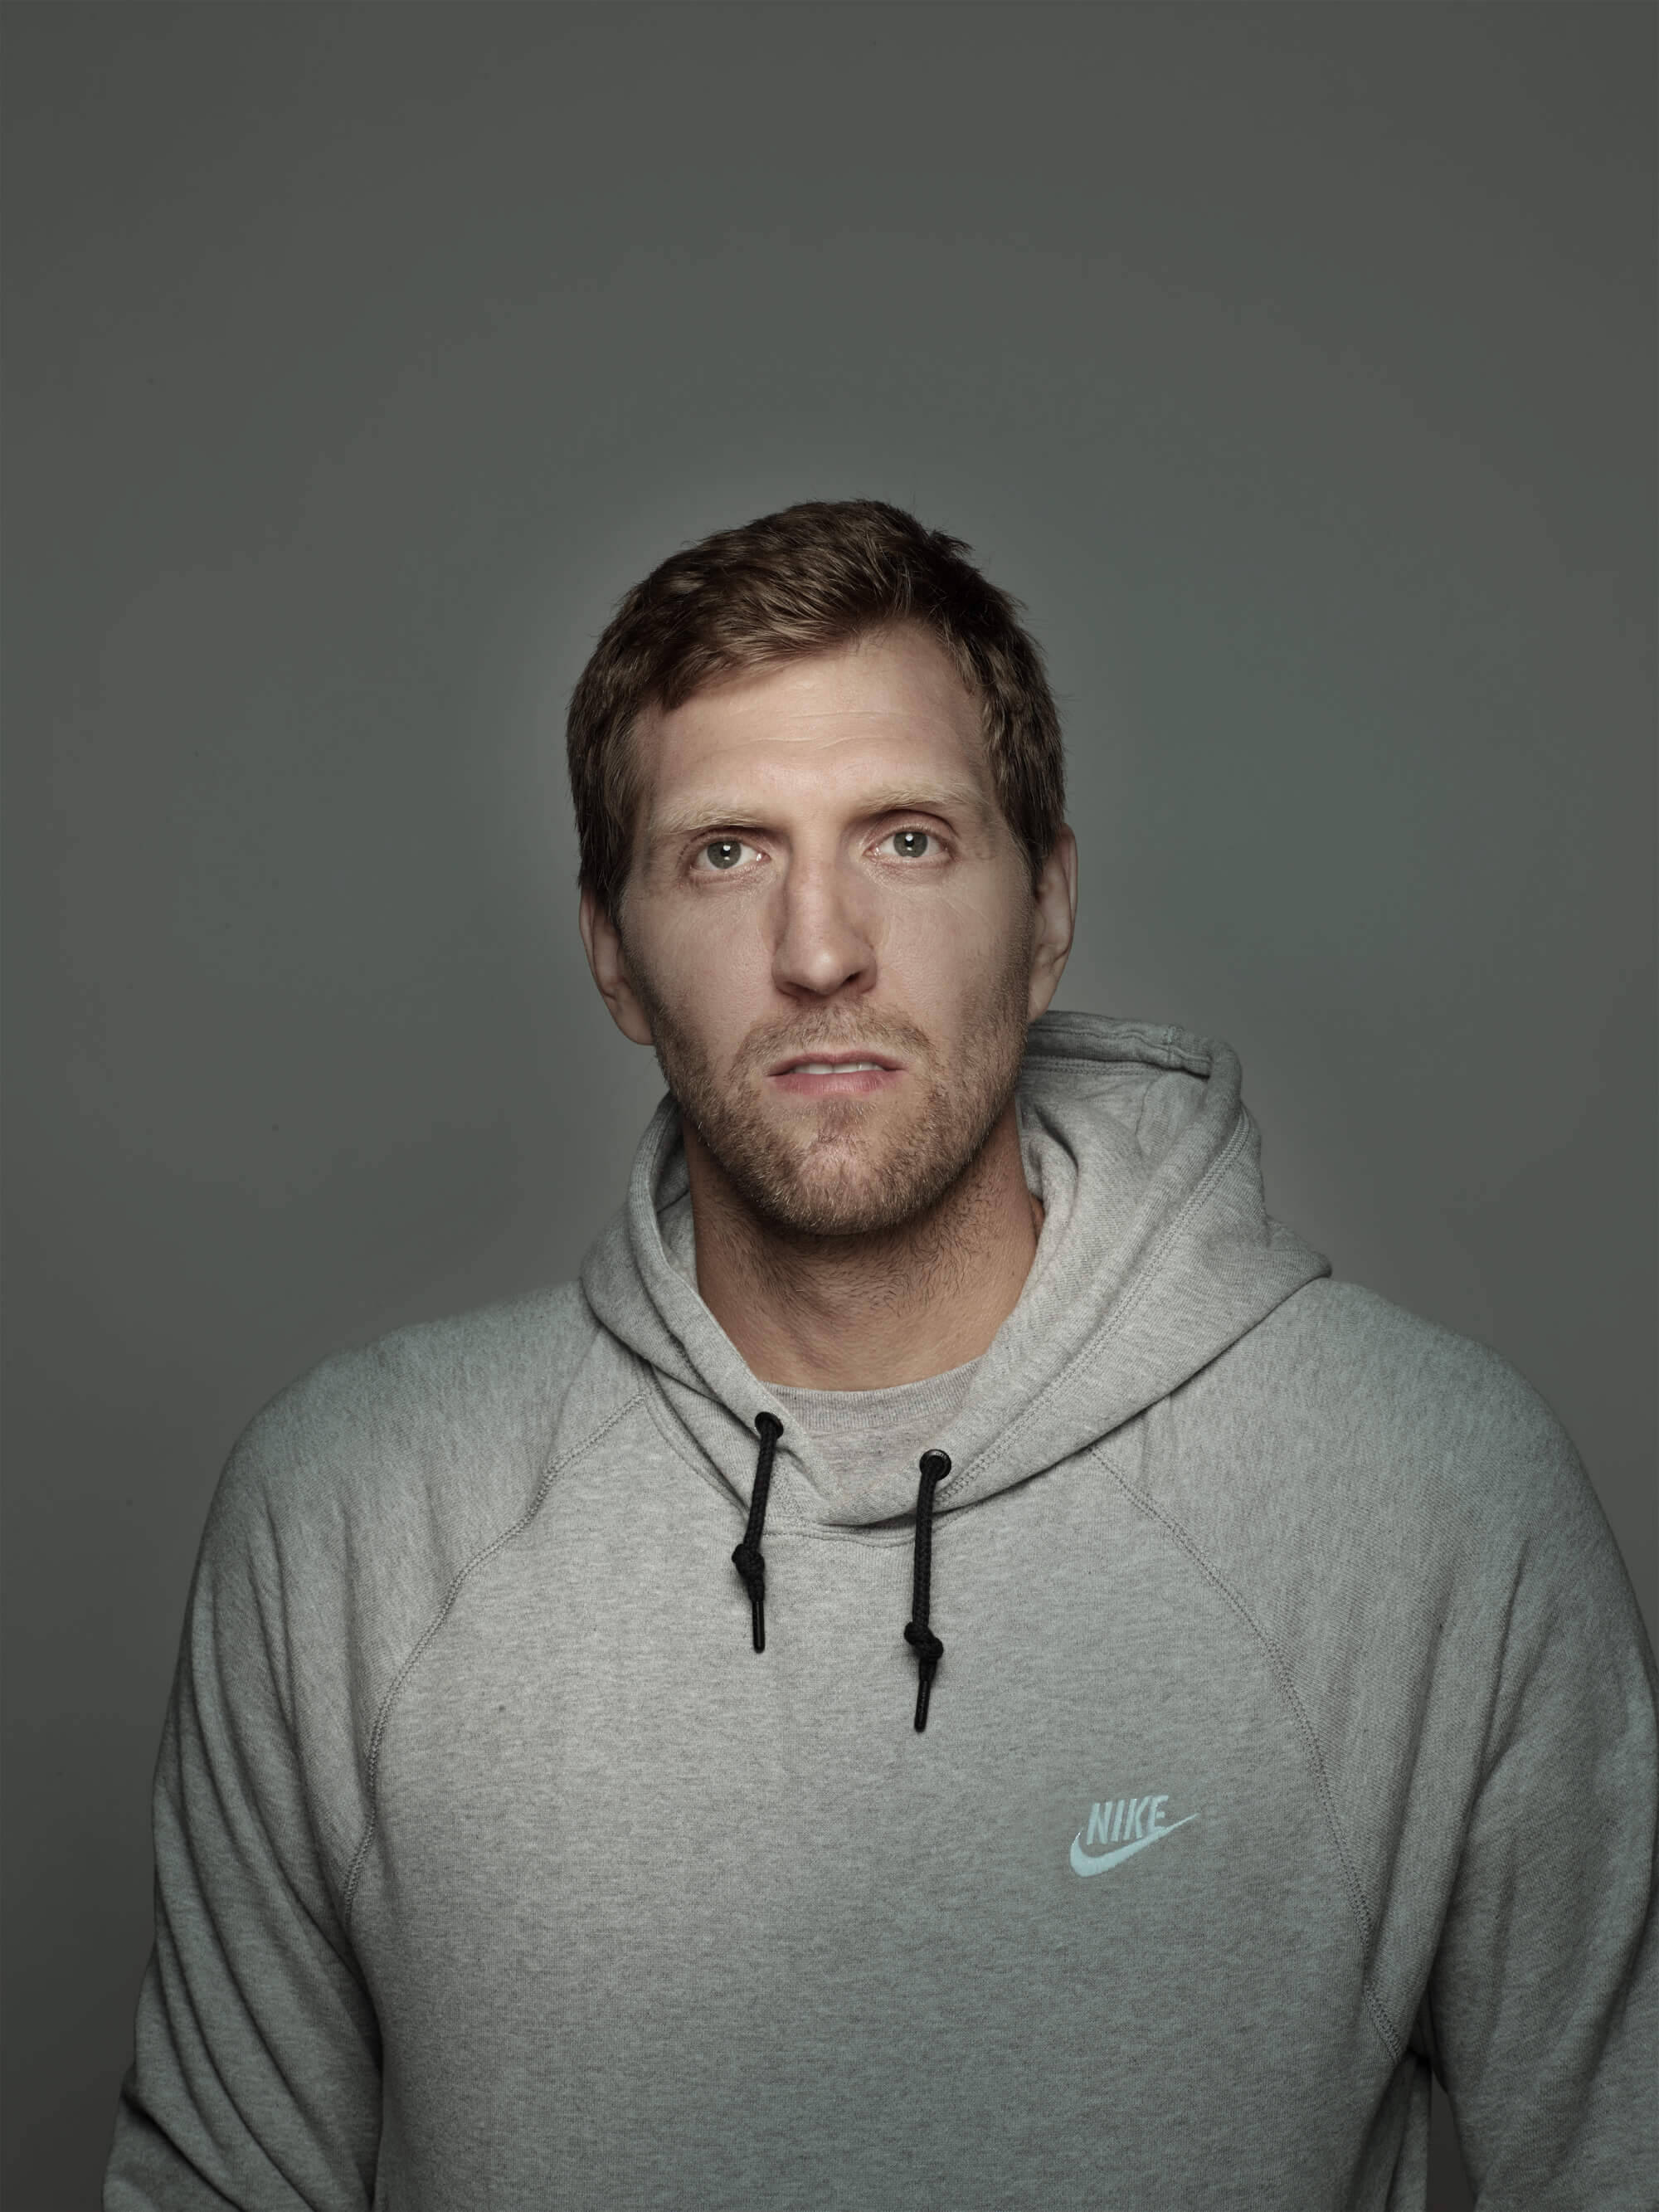 Portrait of Dirk Nowitzki in the gray hoodie against a gray background